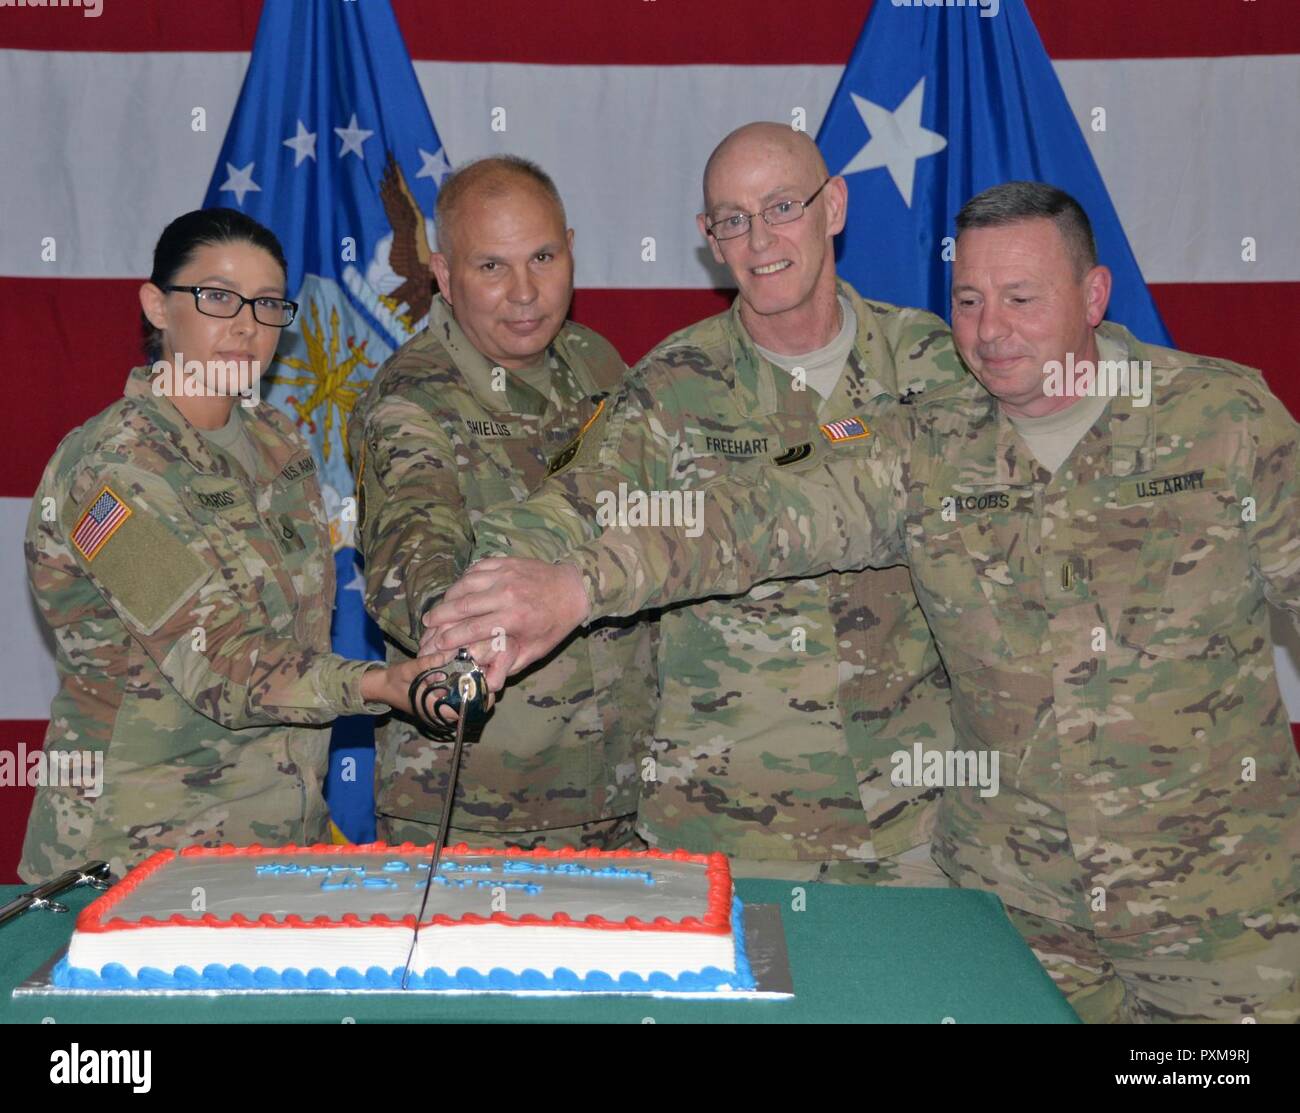 Youngest and oldest Soldiers present cut the birthday cake during Army Birthday ceremonies at New York National Guard Headquarters in Latham, N.Y. on June 17, 2017. Cutting the cake are, from left, PFC Jade Richards, the youngest Solldier, Brig. Gen. Raymond Shields, commander of the New York Army National Guard, Col. James Freehart, the oldest Soldier present, and Chief Warrant Officer 5 Gordon Jacobs, another Army veteran.New York Army National Guard members celebrated the 242nd Birthday of the United States Army. Stock Photo